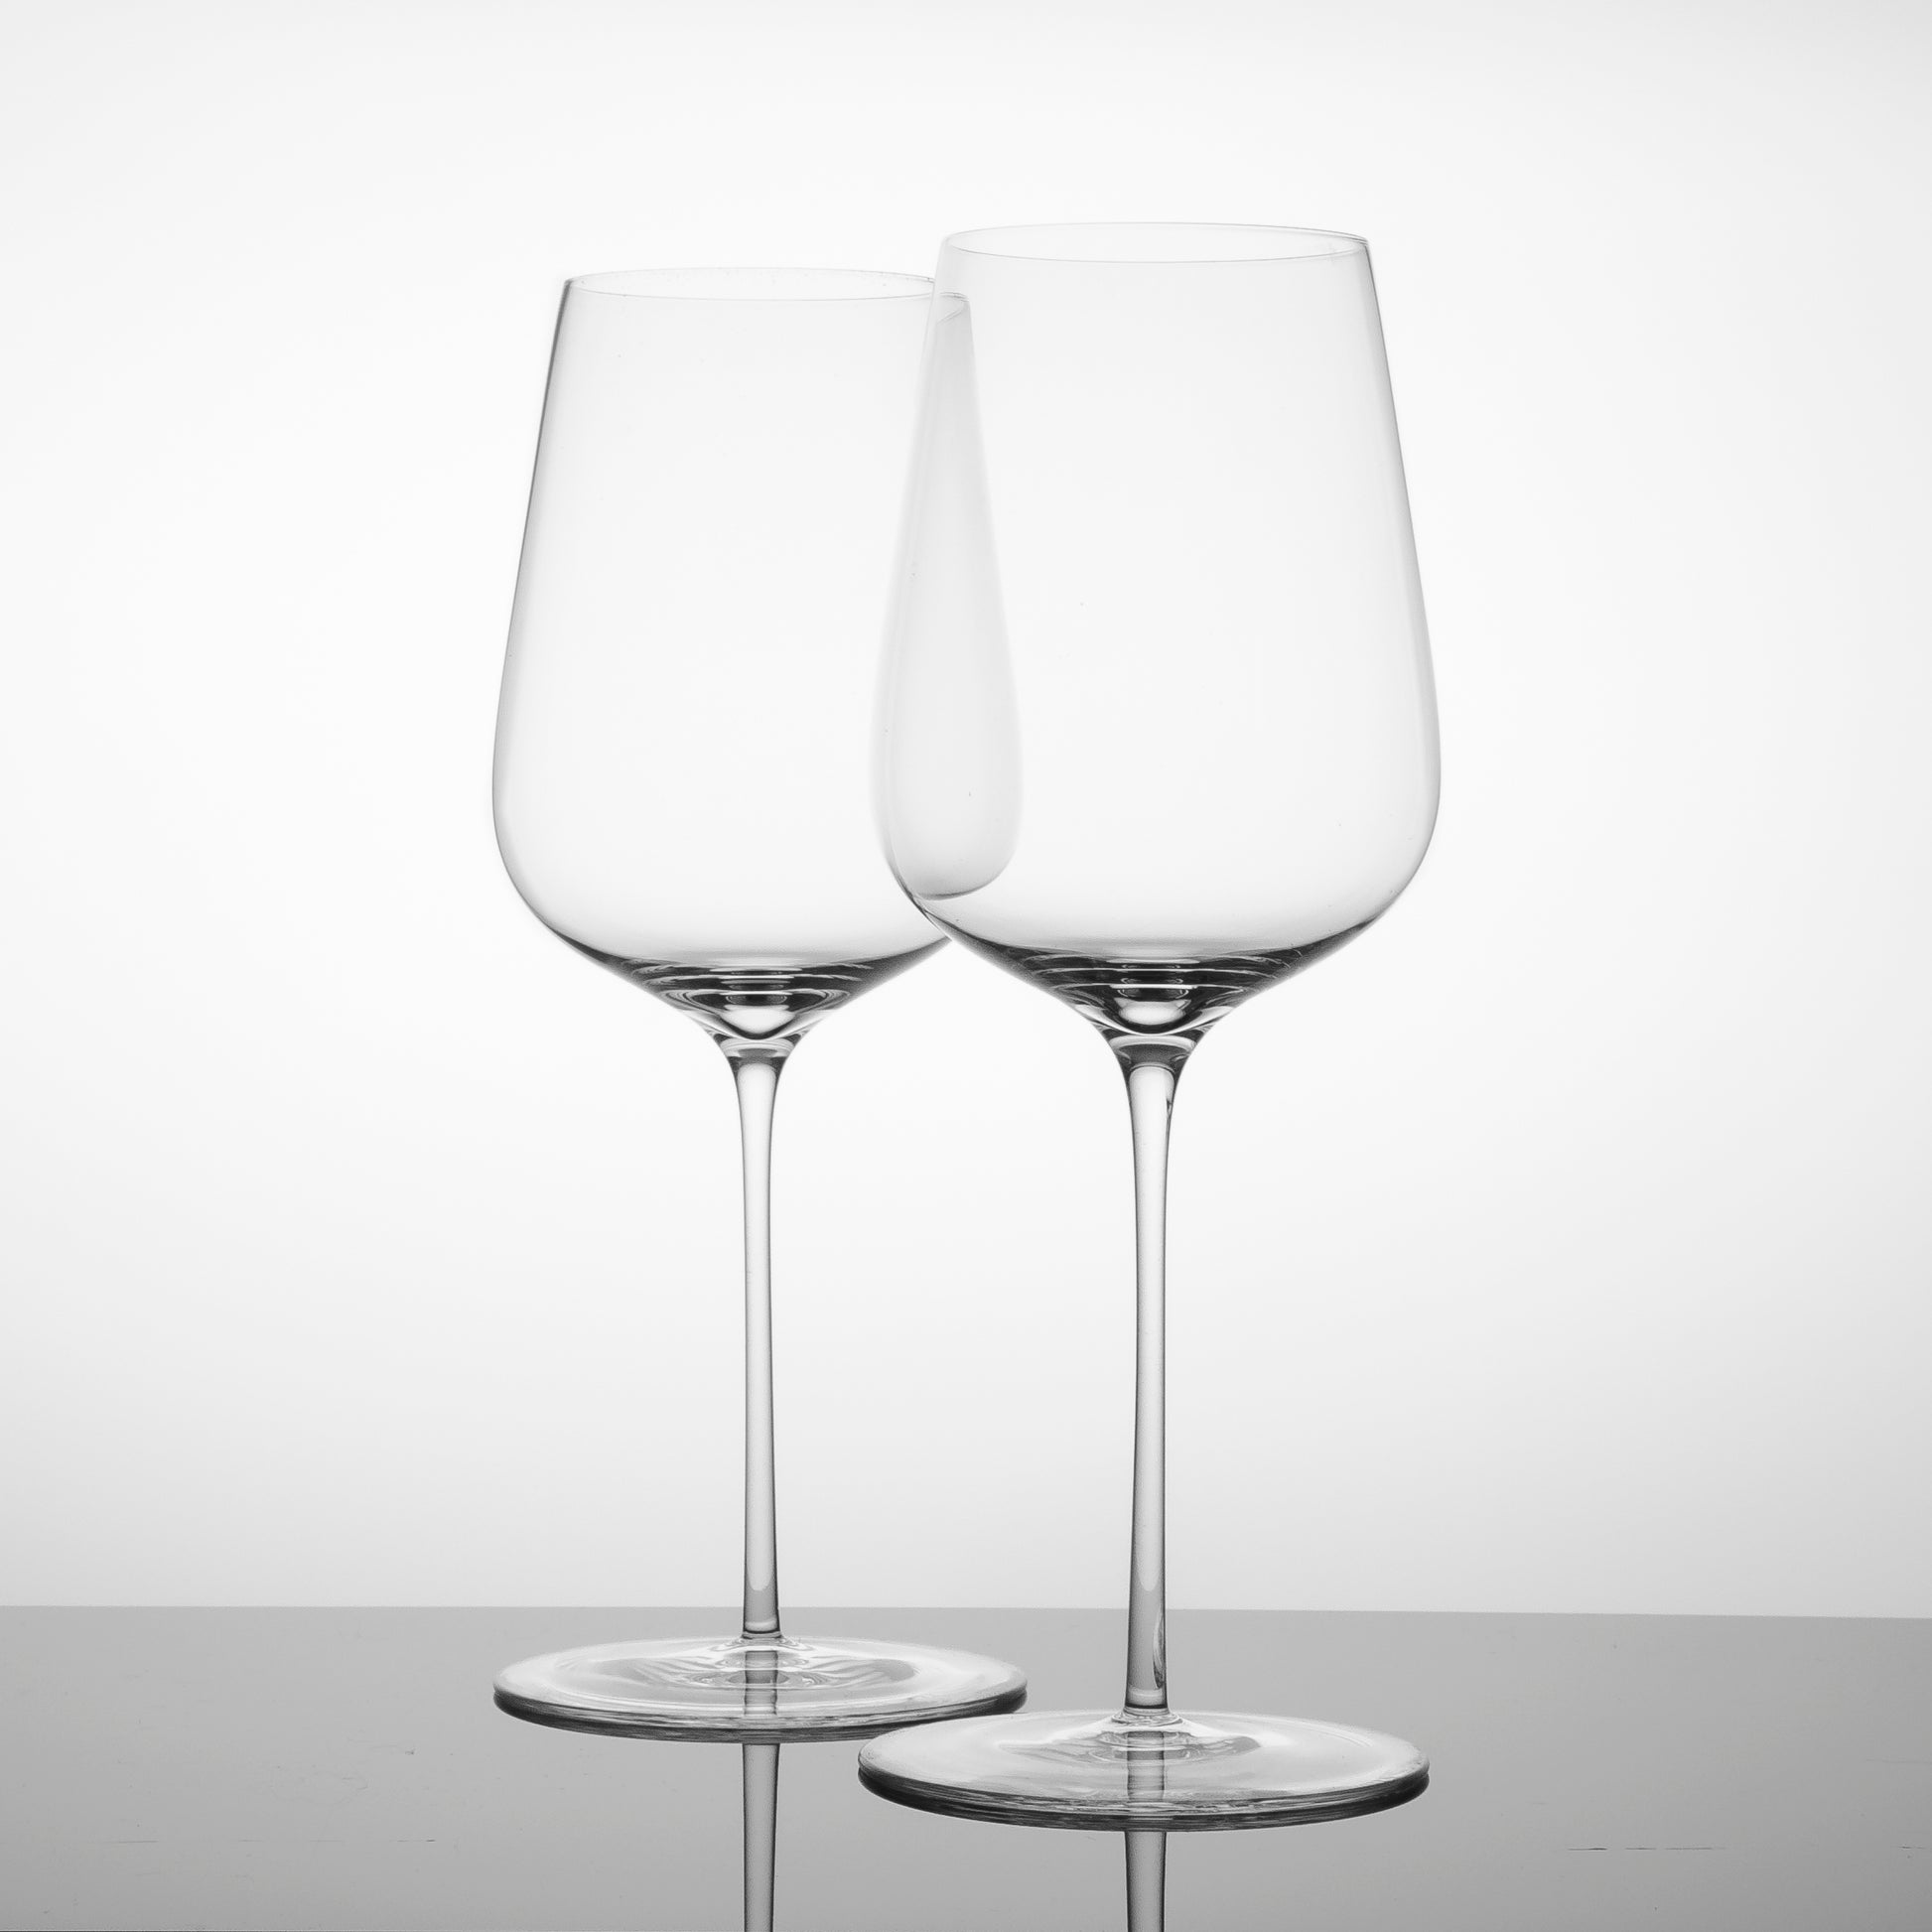 Vermont Stemless Wine Glasses - Set of 2 at M.LaHart & Co.